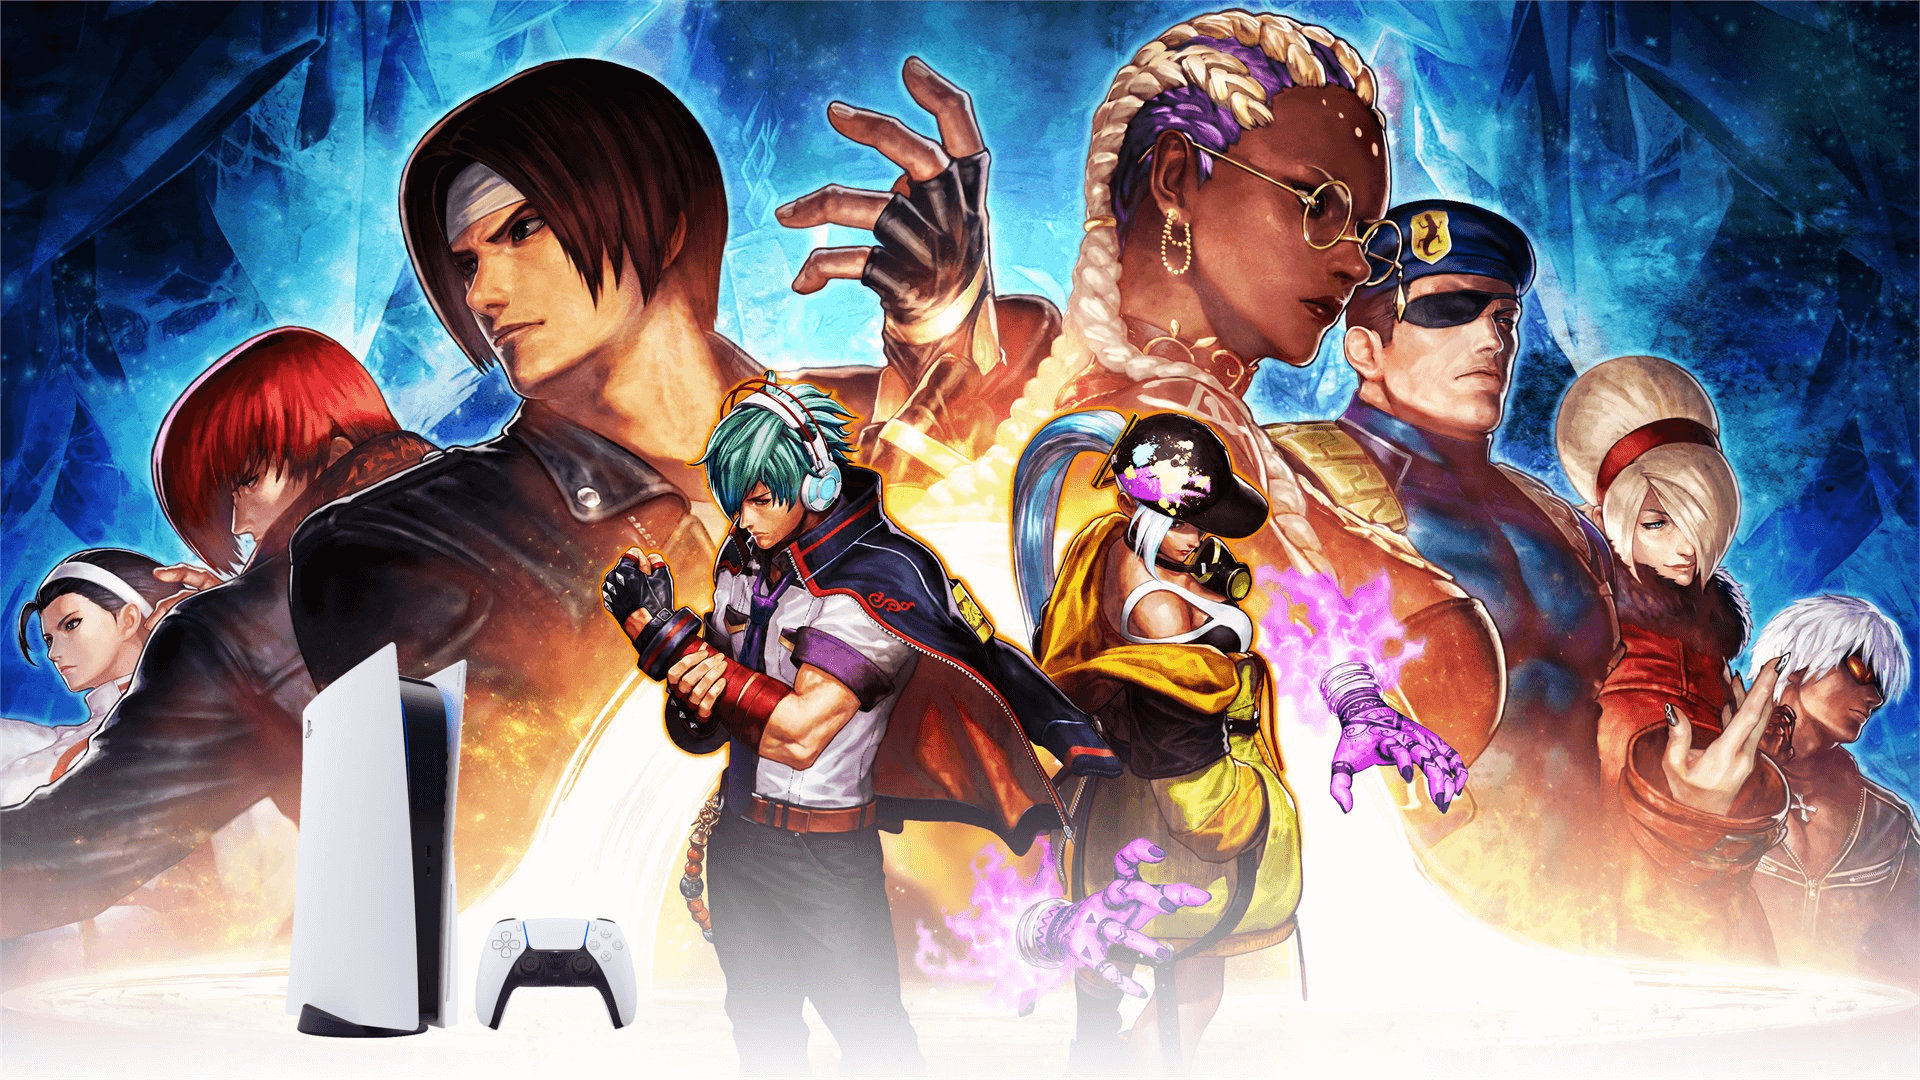 KOF XV at PlayStation Tournaments: Compete Right Now!